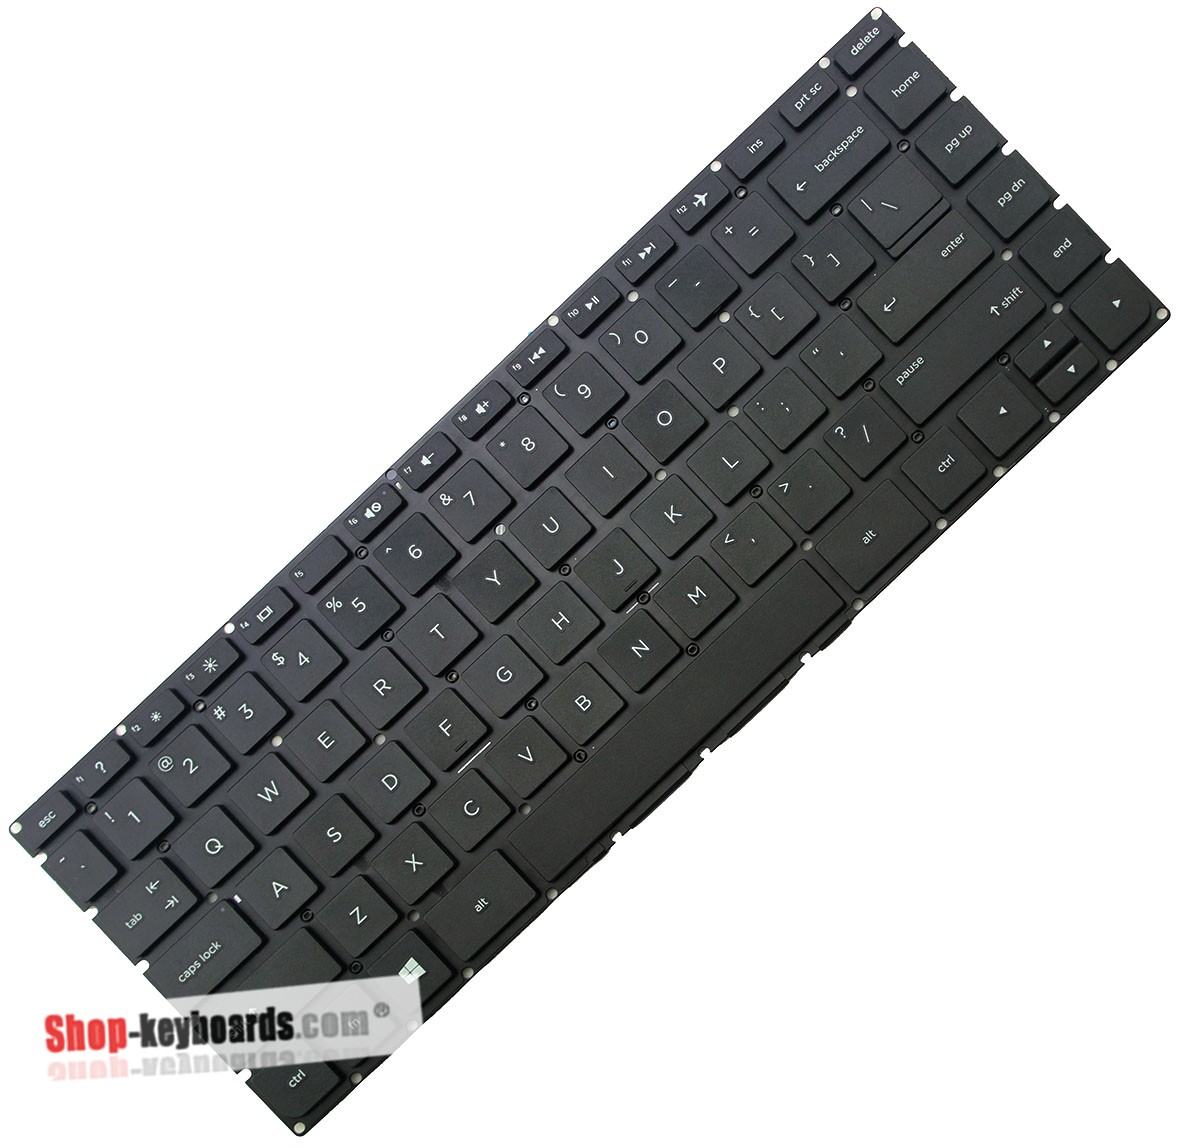 HP 246 G4 Keyboard replacement